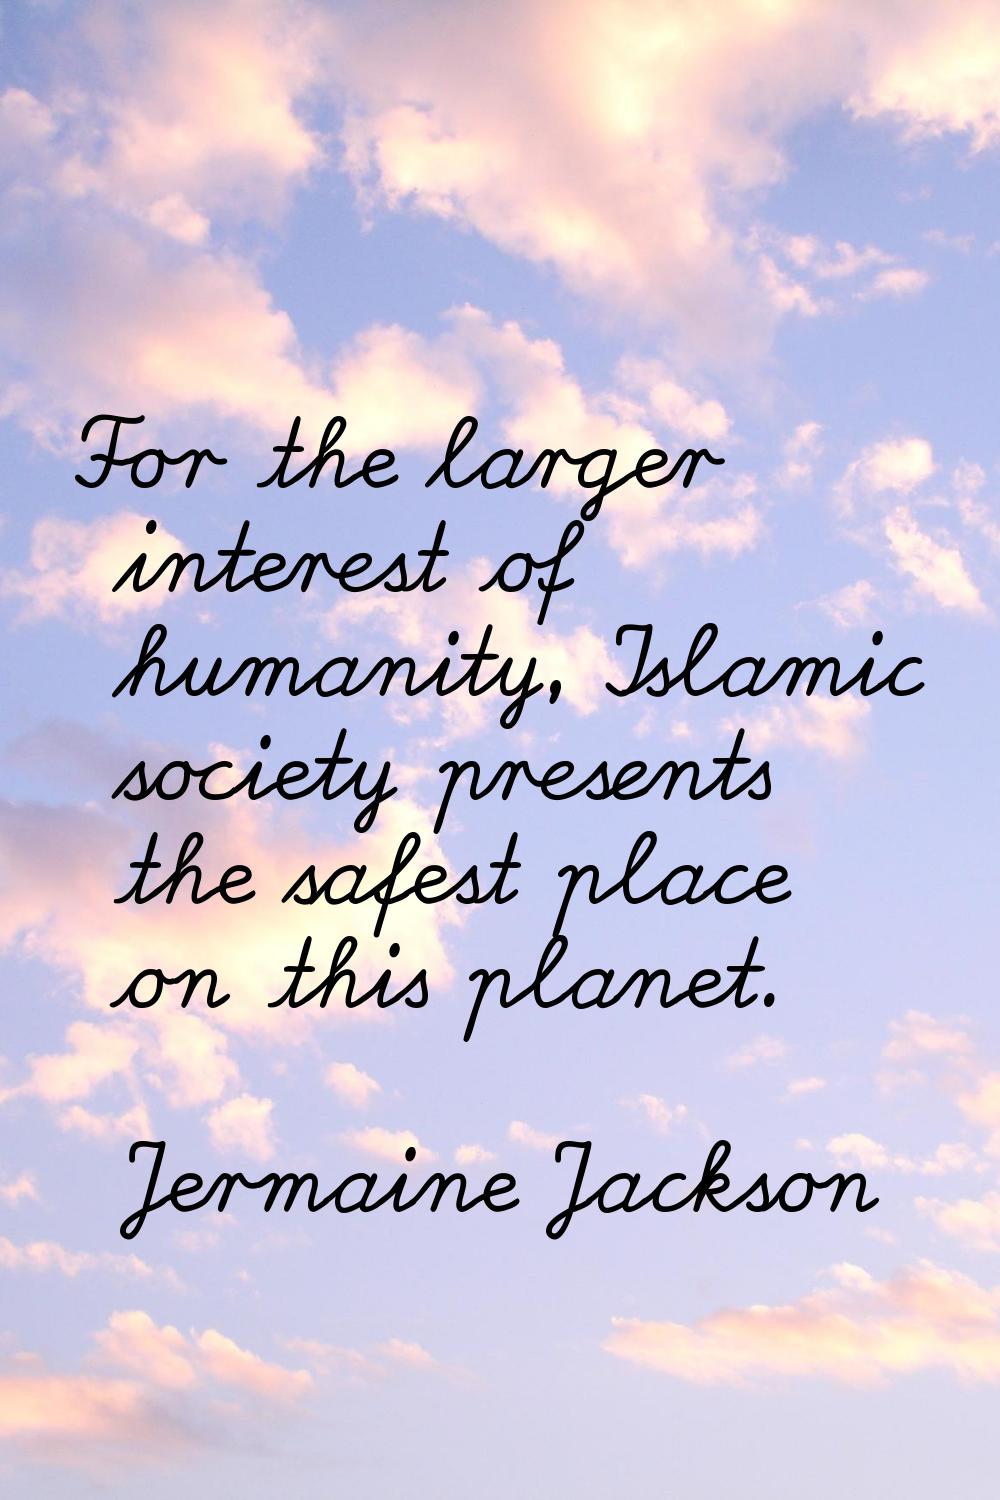 For the larger interest of humanity, Islamic society presents the safest place on this planet.